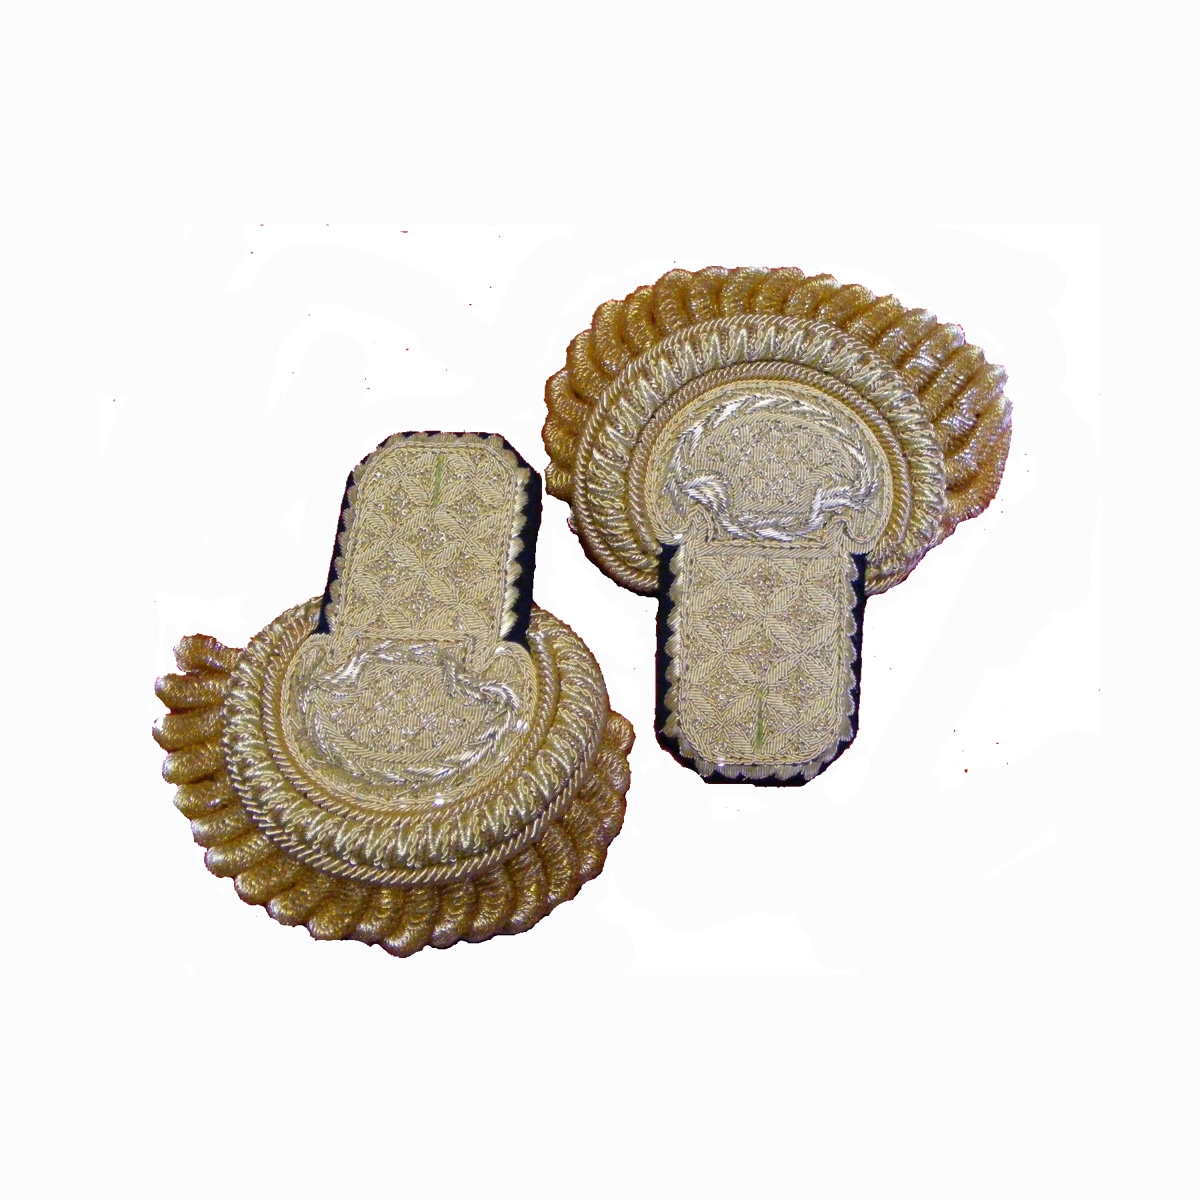 Epaulettes silver and gold color type VII - The pair Customized Hand Embroidery 